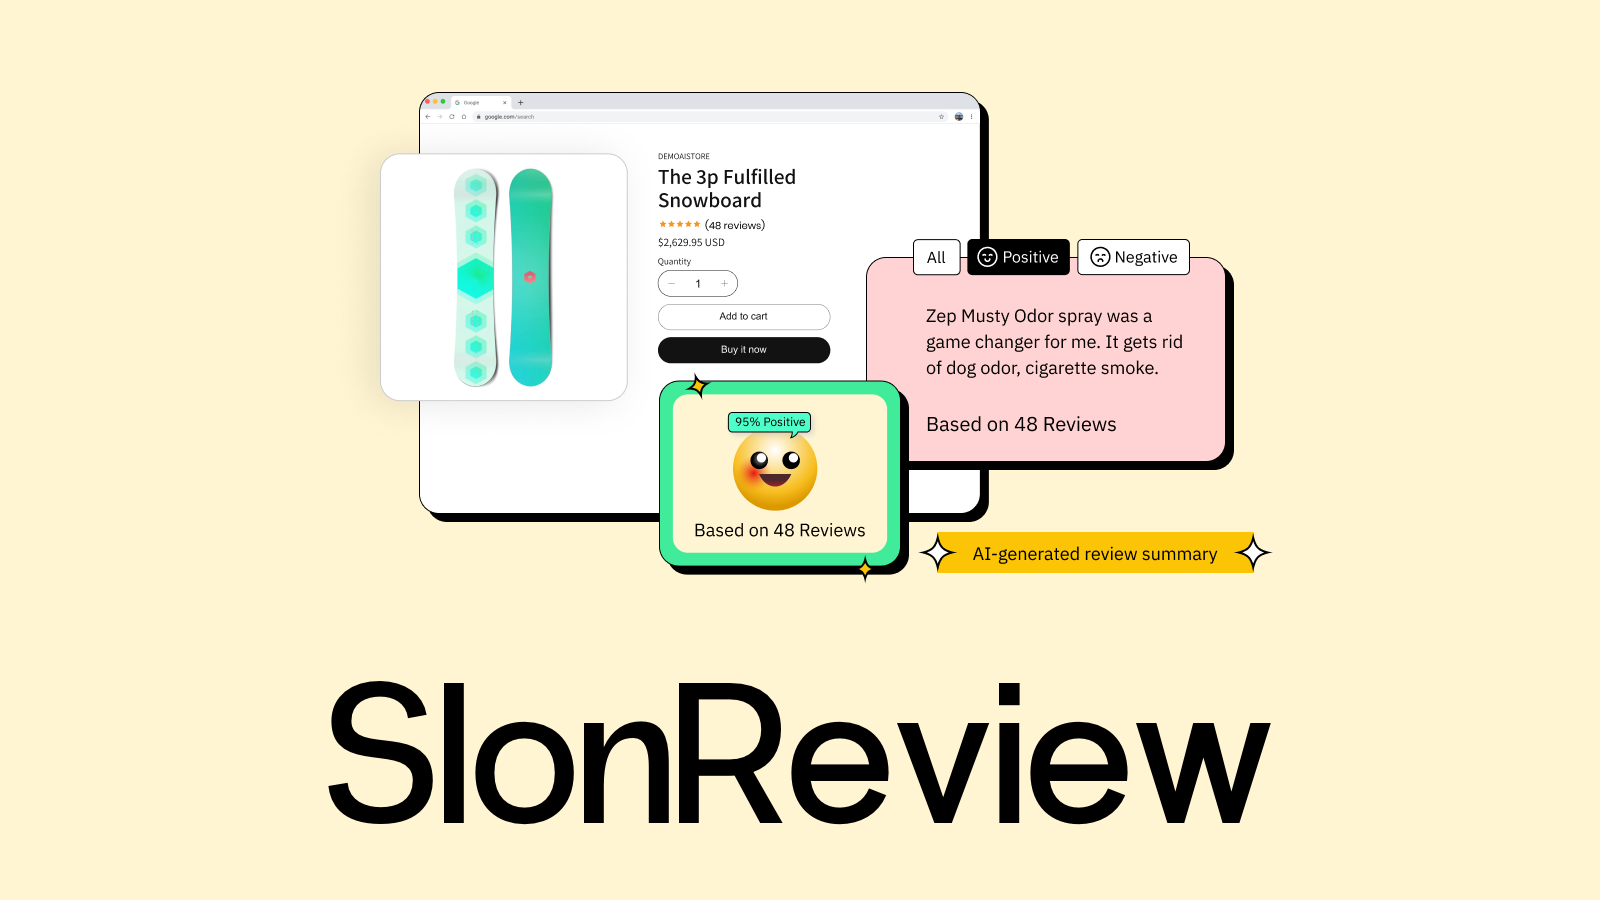 Slon Review Anwendungsfunktion